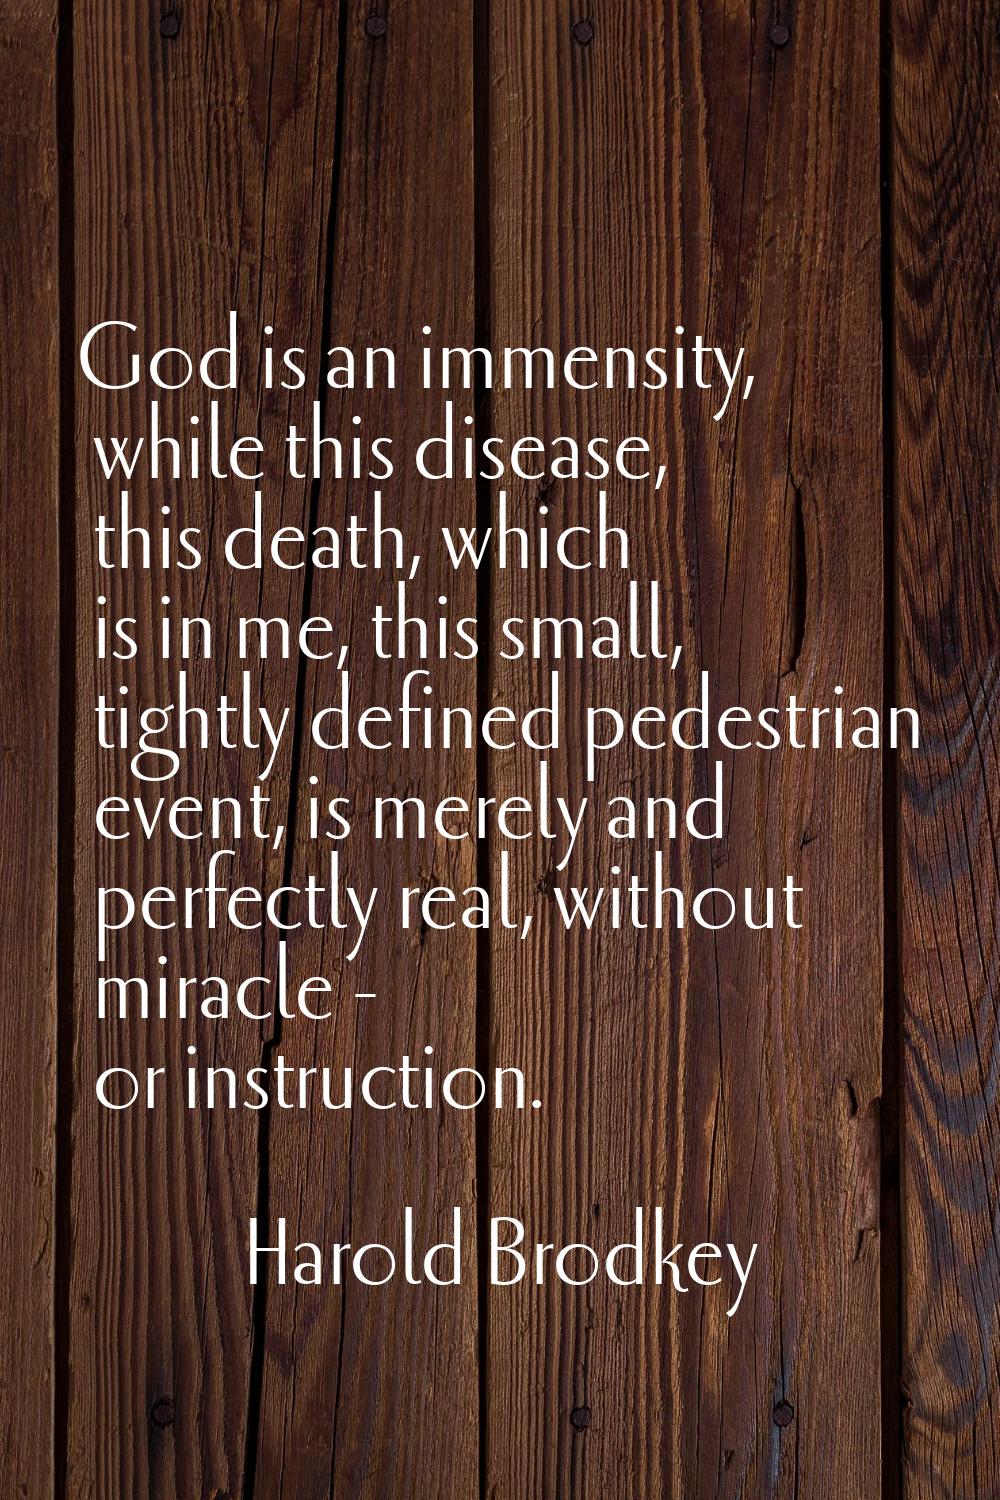 God is an immensity, while this disease, this death, which is in me, this small, tightly defined pe